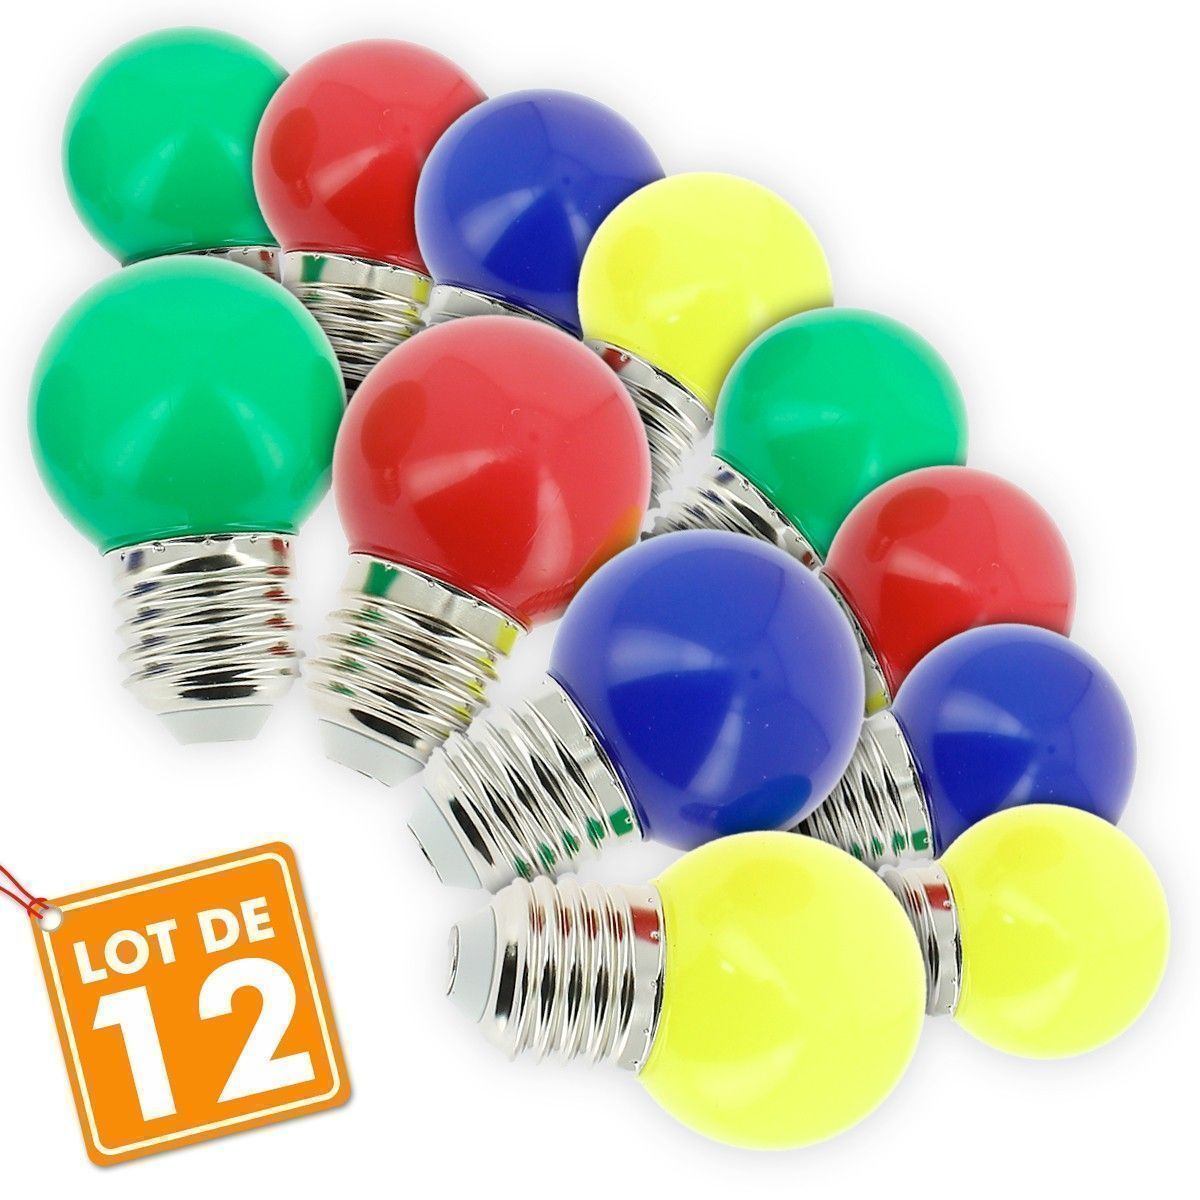 Lot of 12 bulbs E27 1W Eq 20W Variegated Outdoor guinguette garland